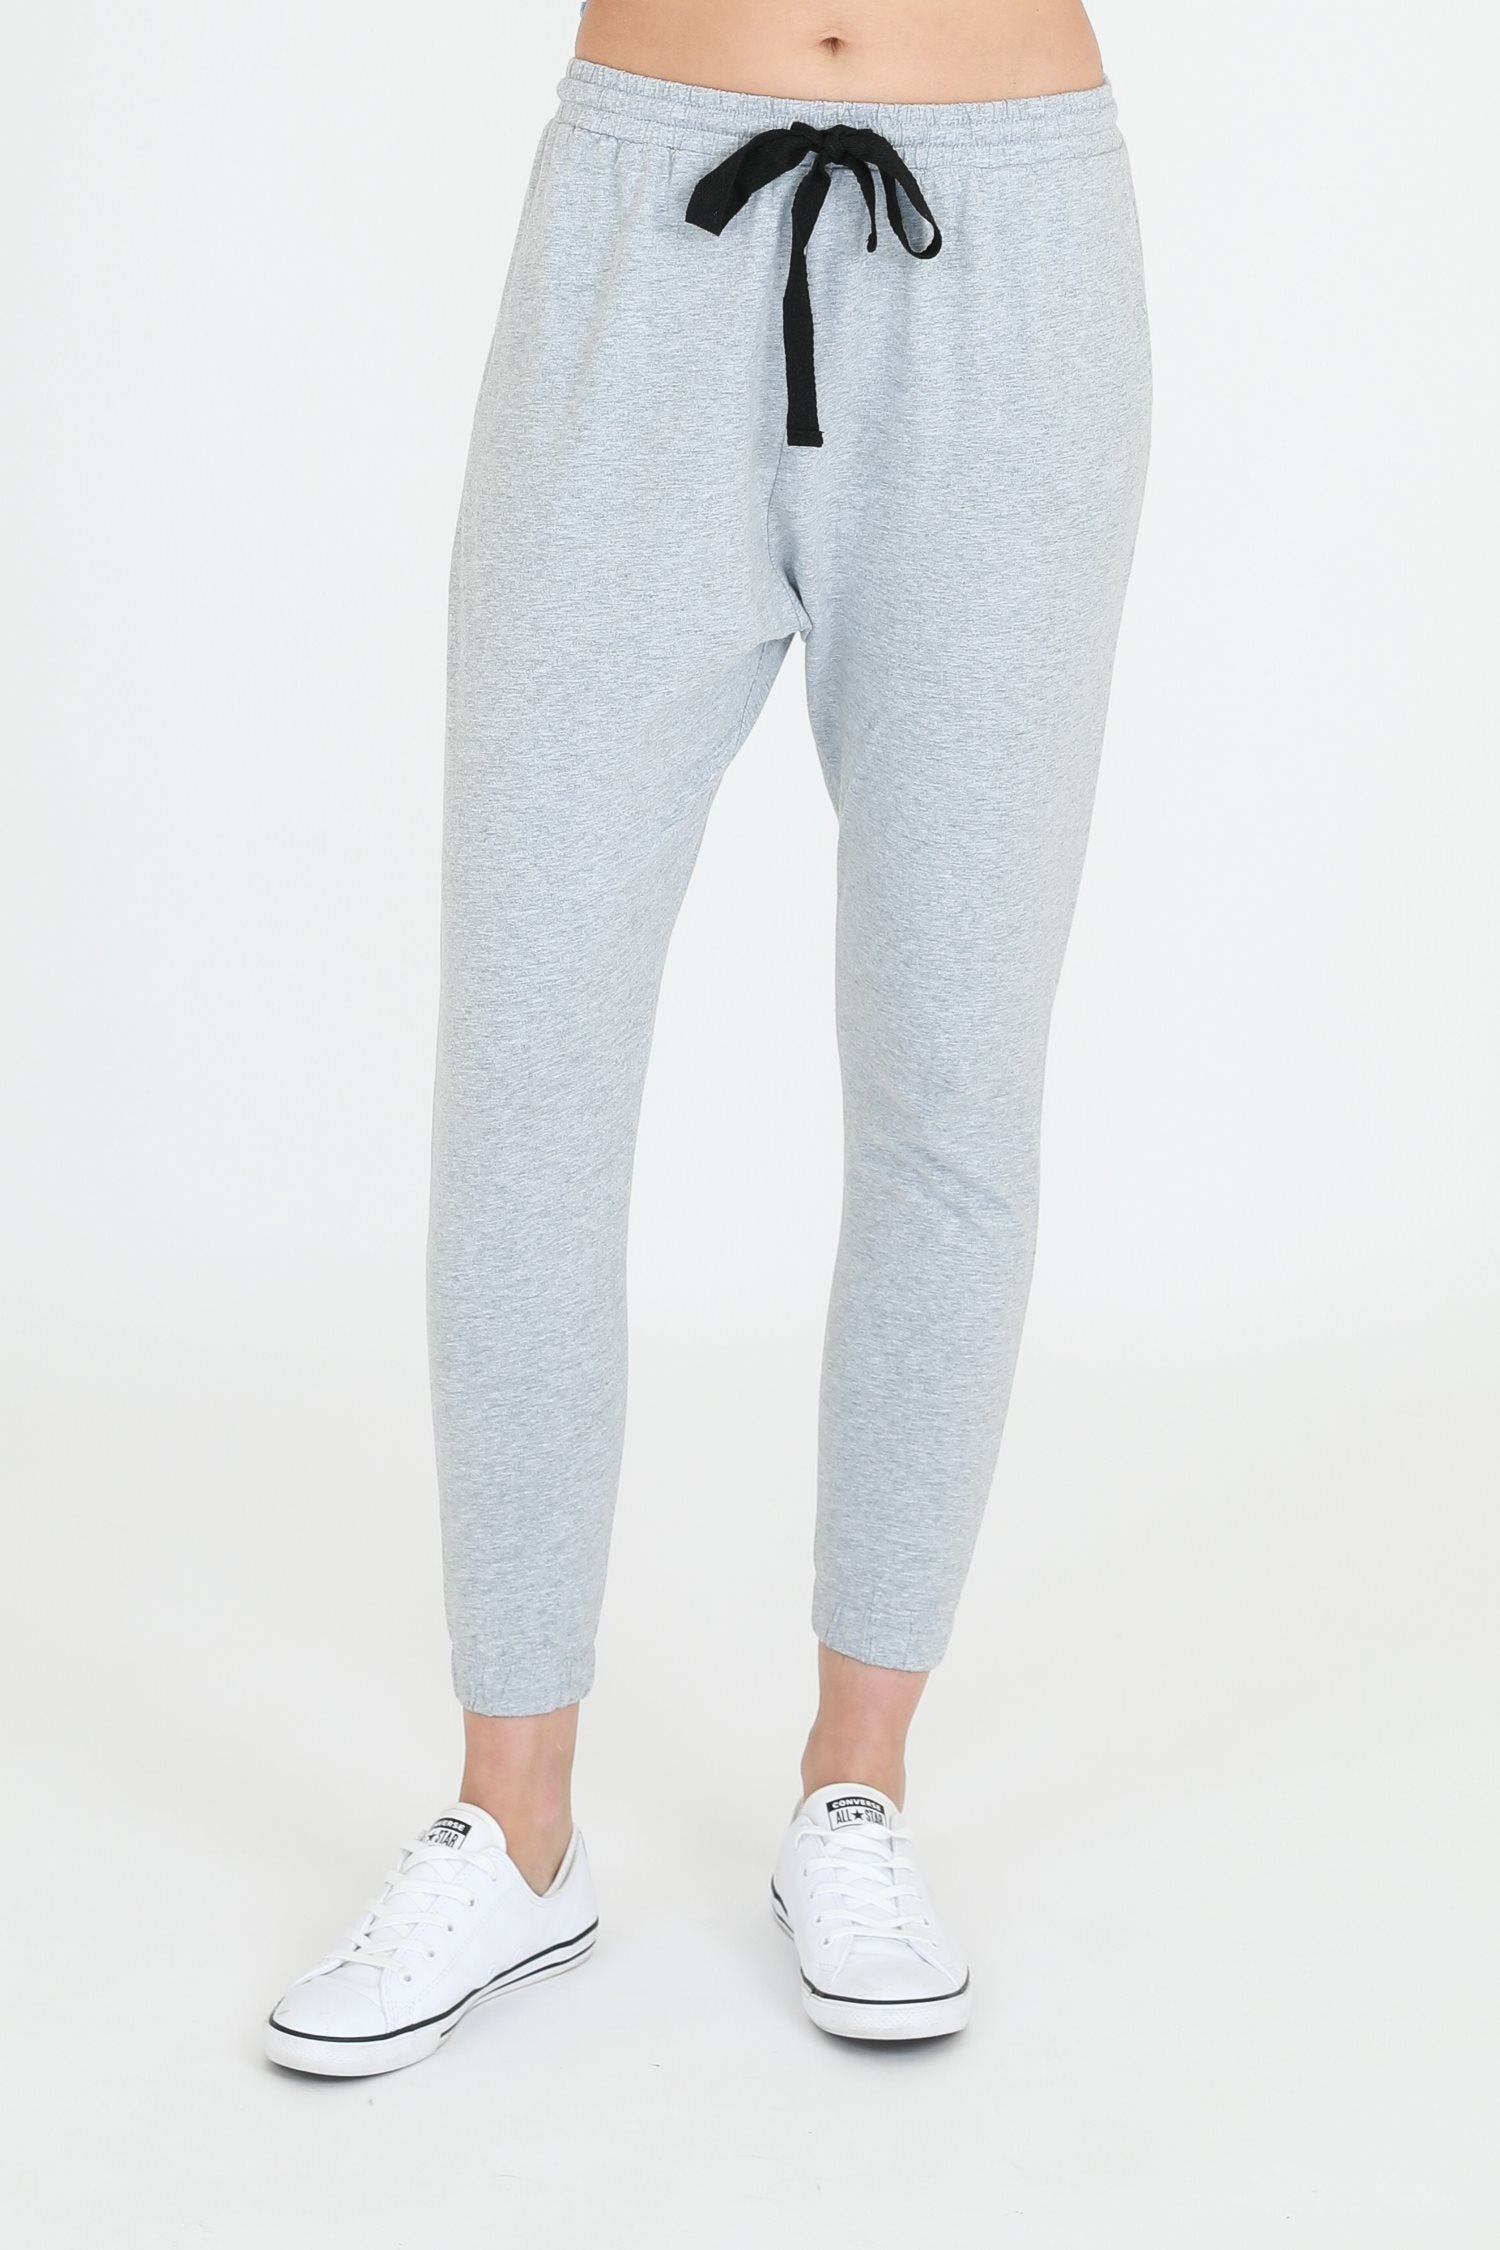 jogger style pants #color_grey marle